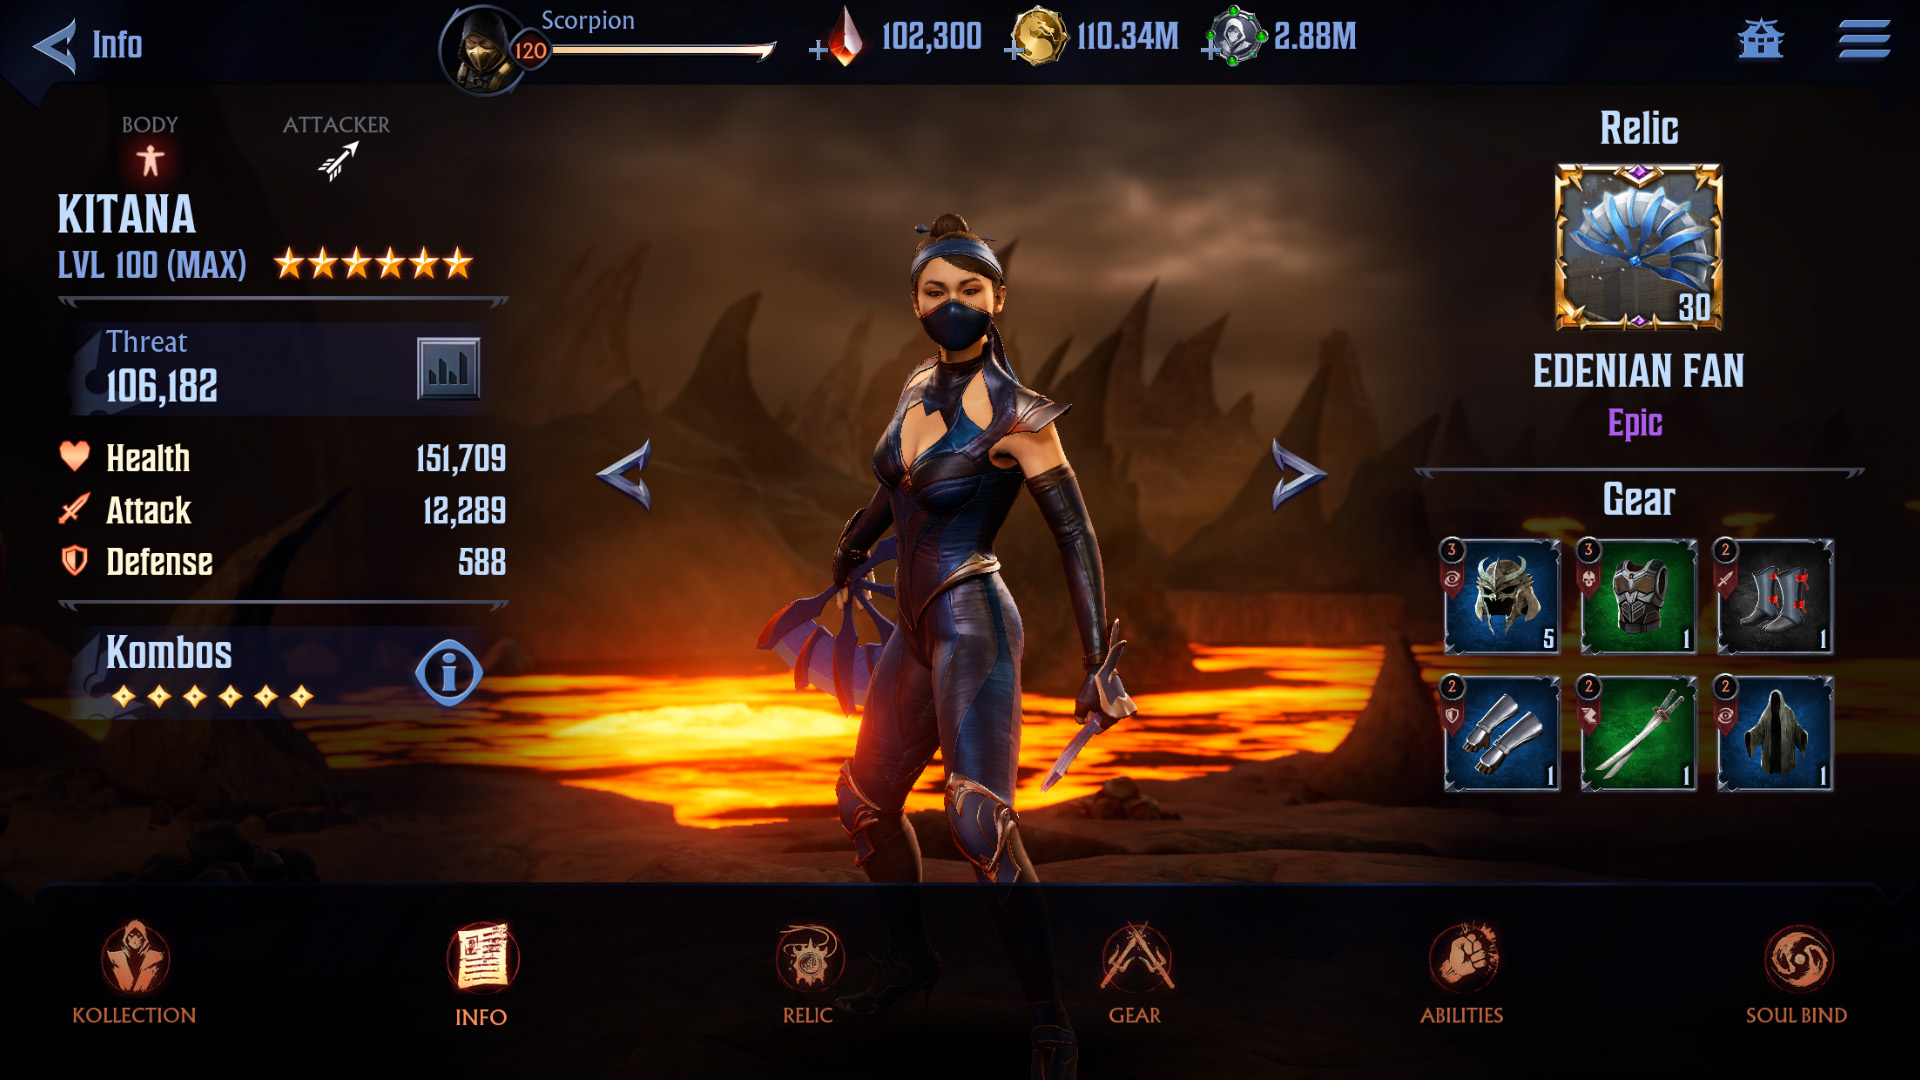 Marvel Strike Force's microtransactions go beyond the mobile